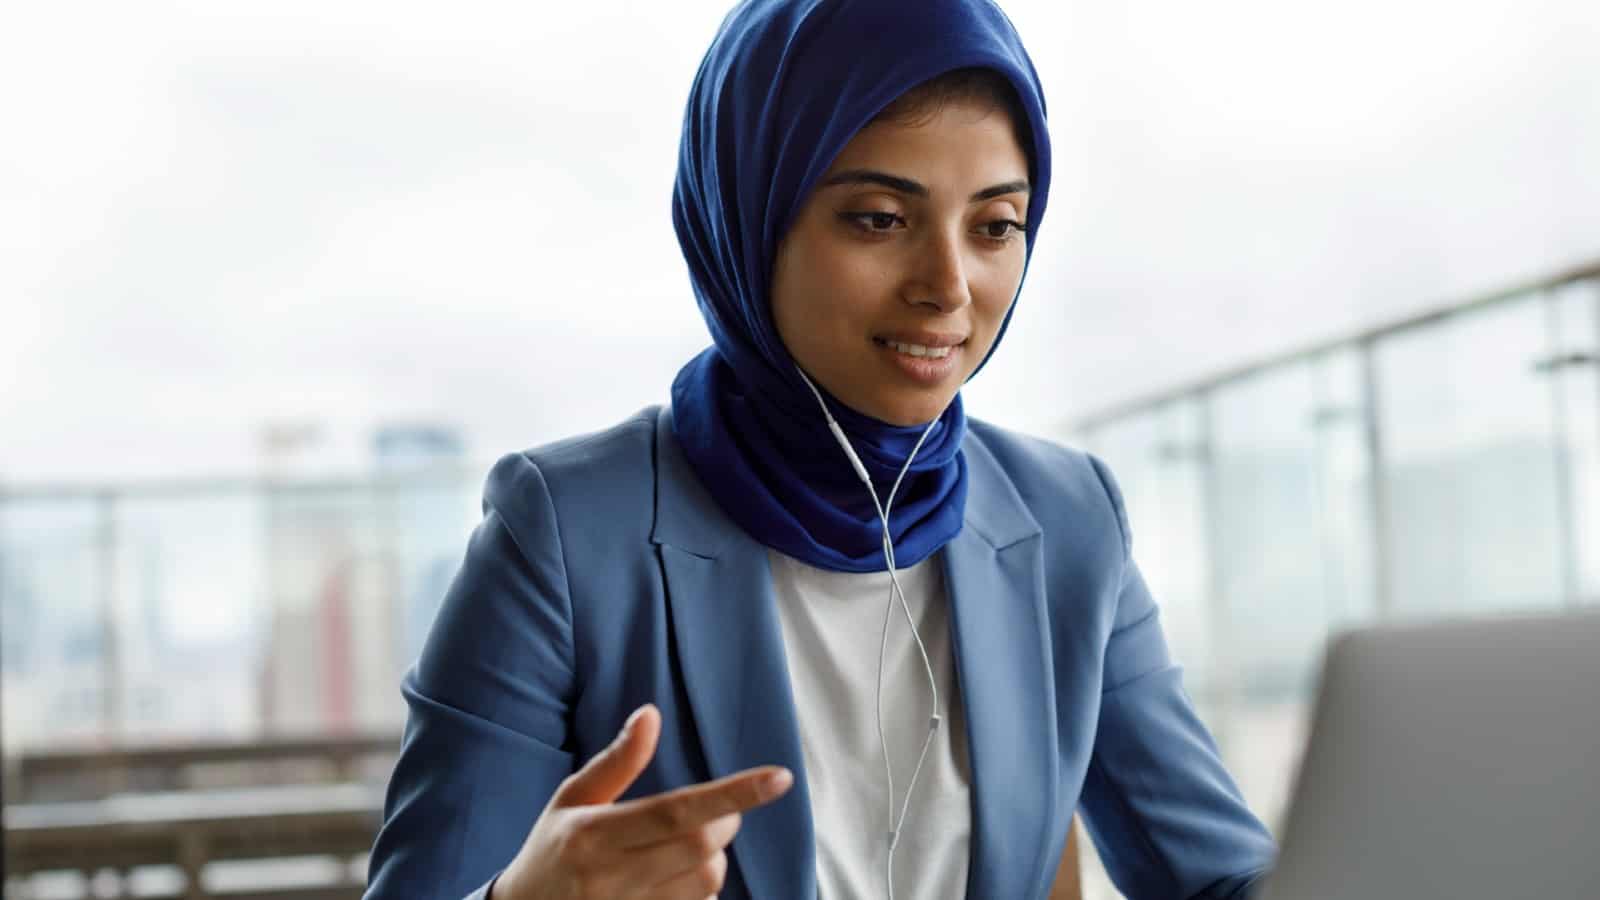 Young woman wearing a headscarf on virtual call using headphones